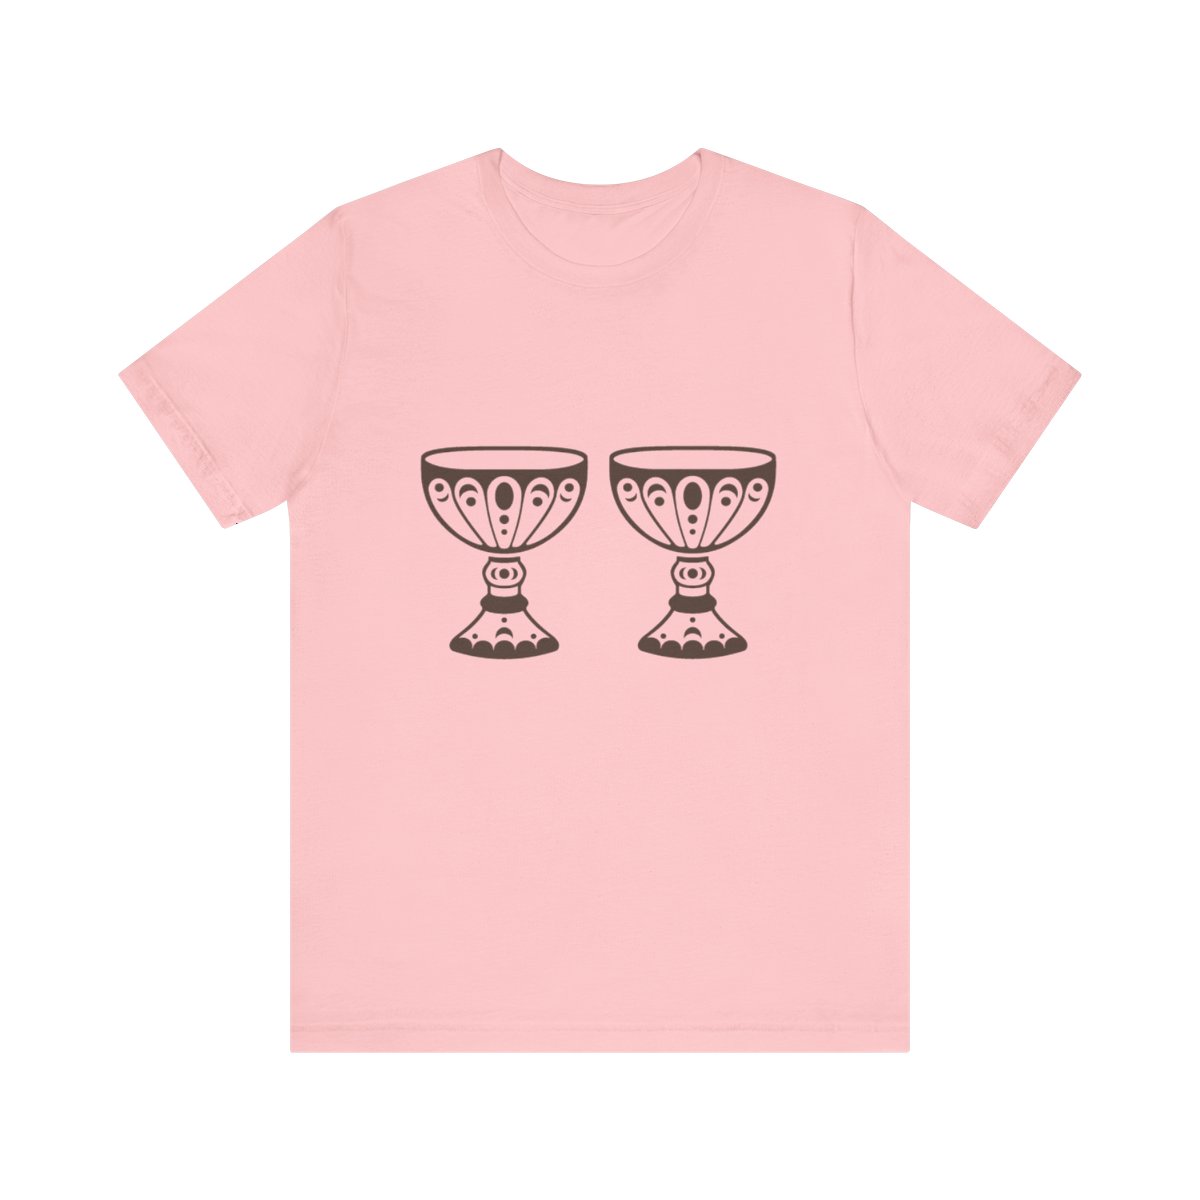 Grail Goblets Tee: Original Pink product thumbnail image